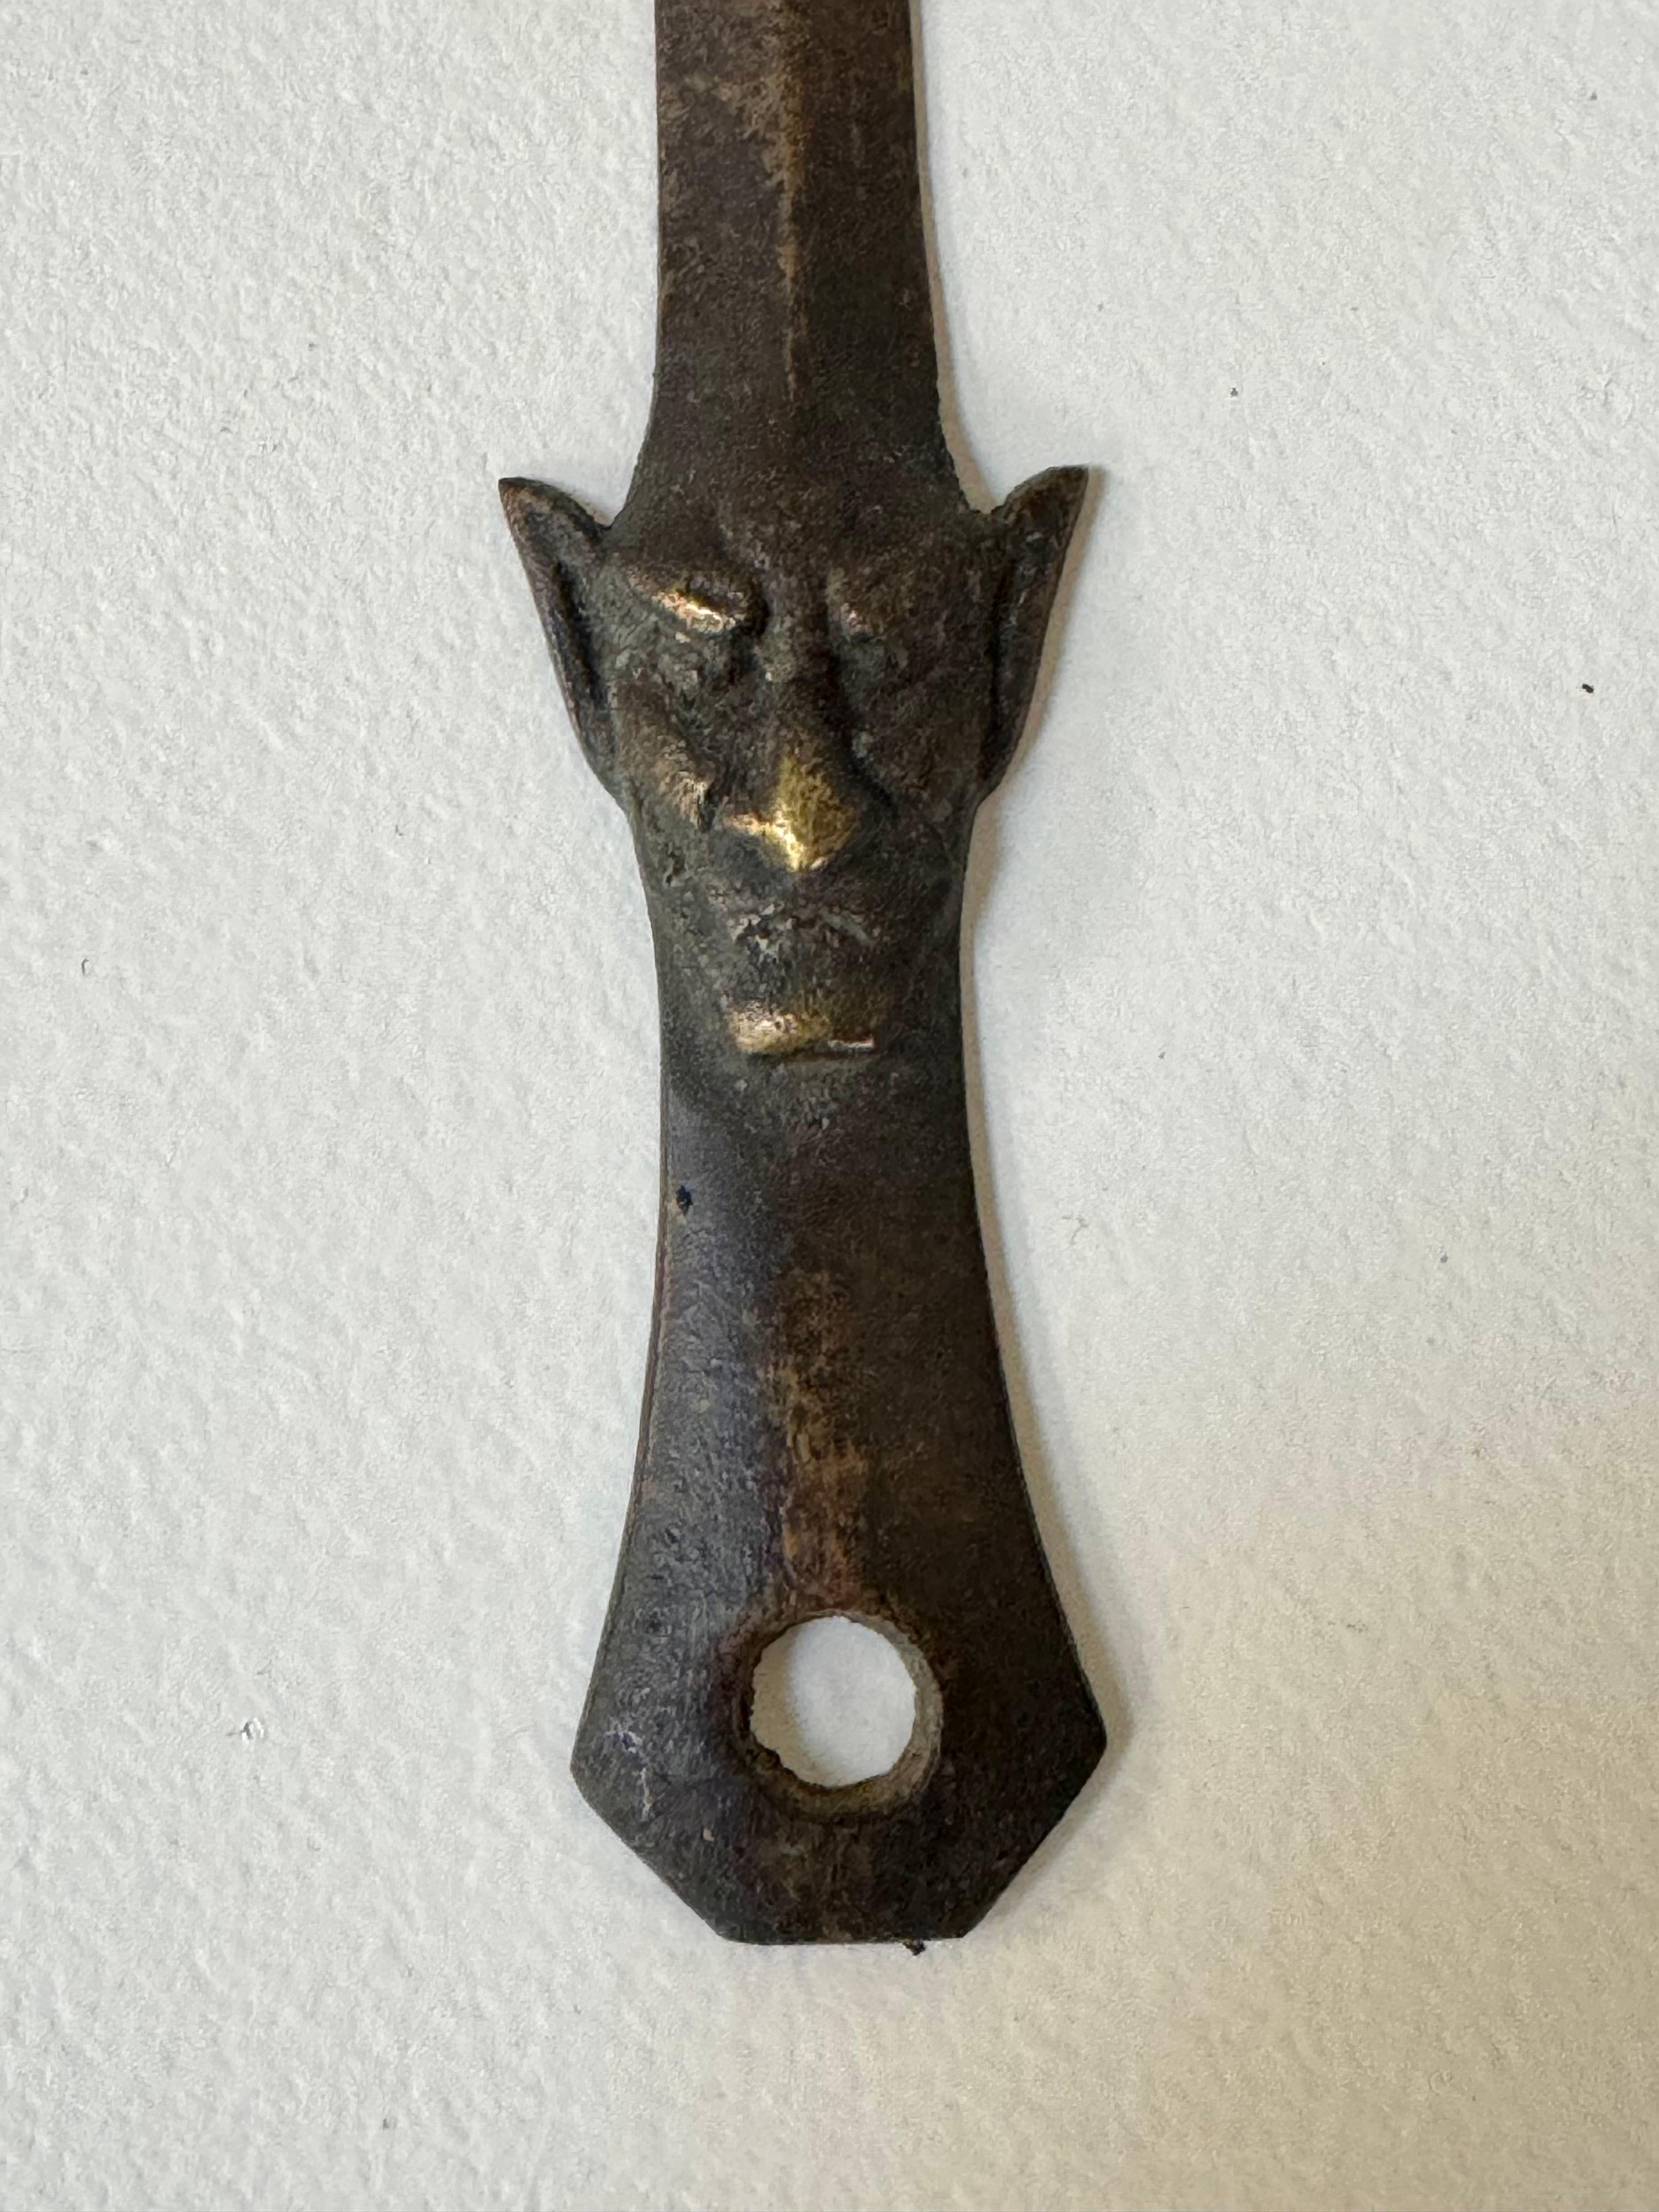 19th Century cast bronze devil letter opener, having a rich patina to the bronze with the Devil's face near the base of the handle, an unusual item.